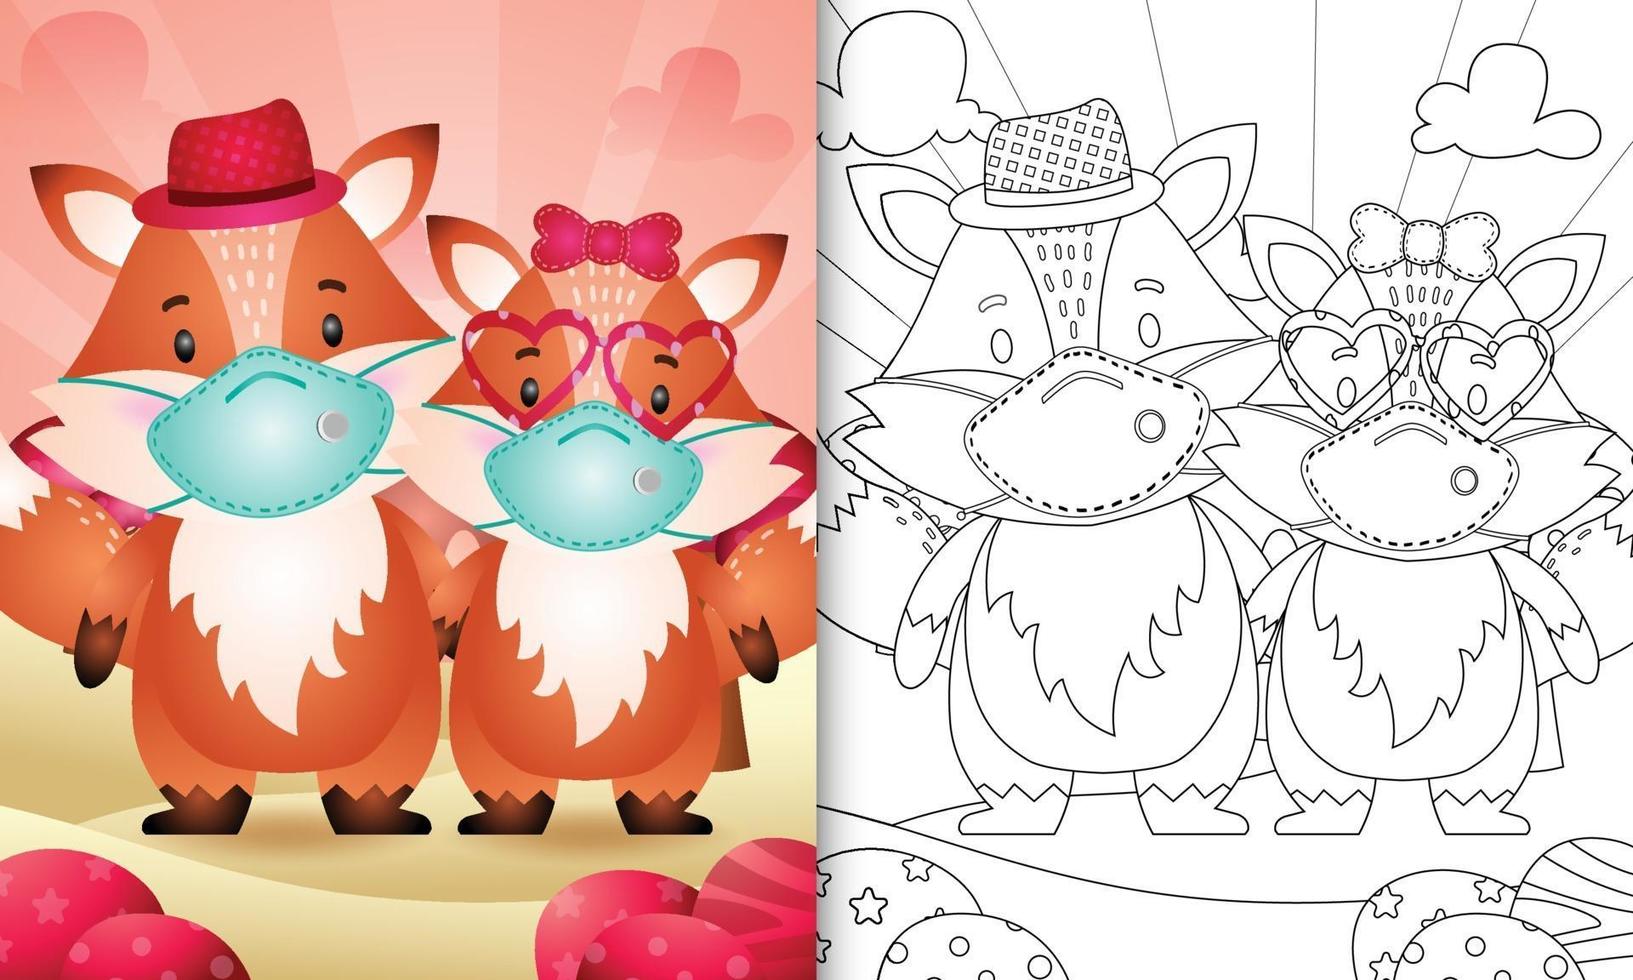 coloring book for kids with Cute valentine's day fox couple using protective face mask vector